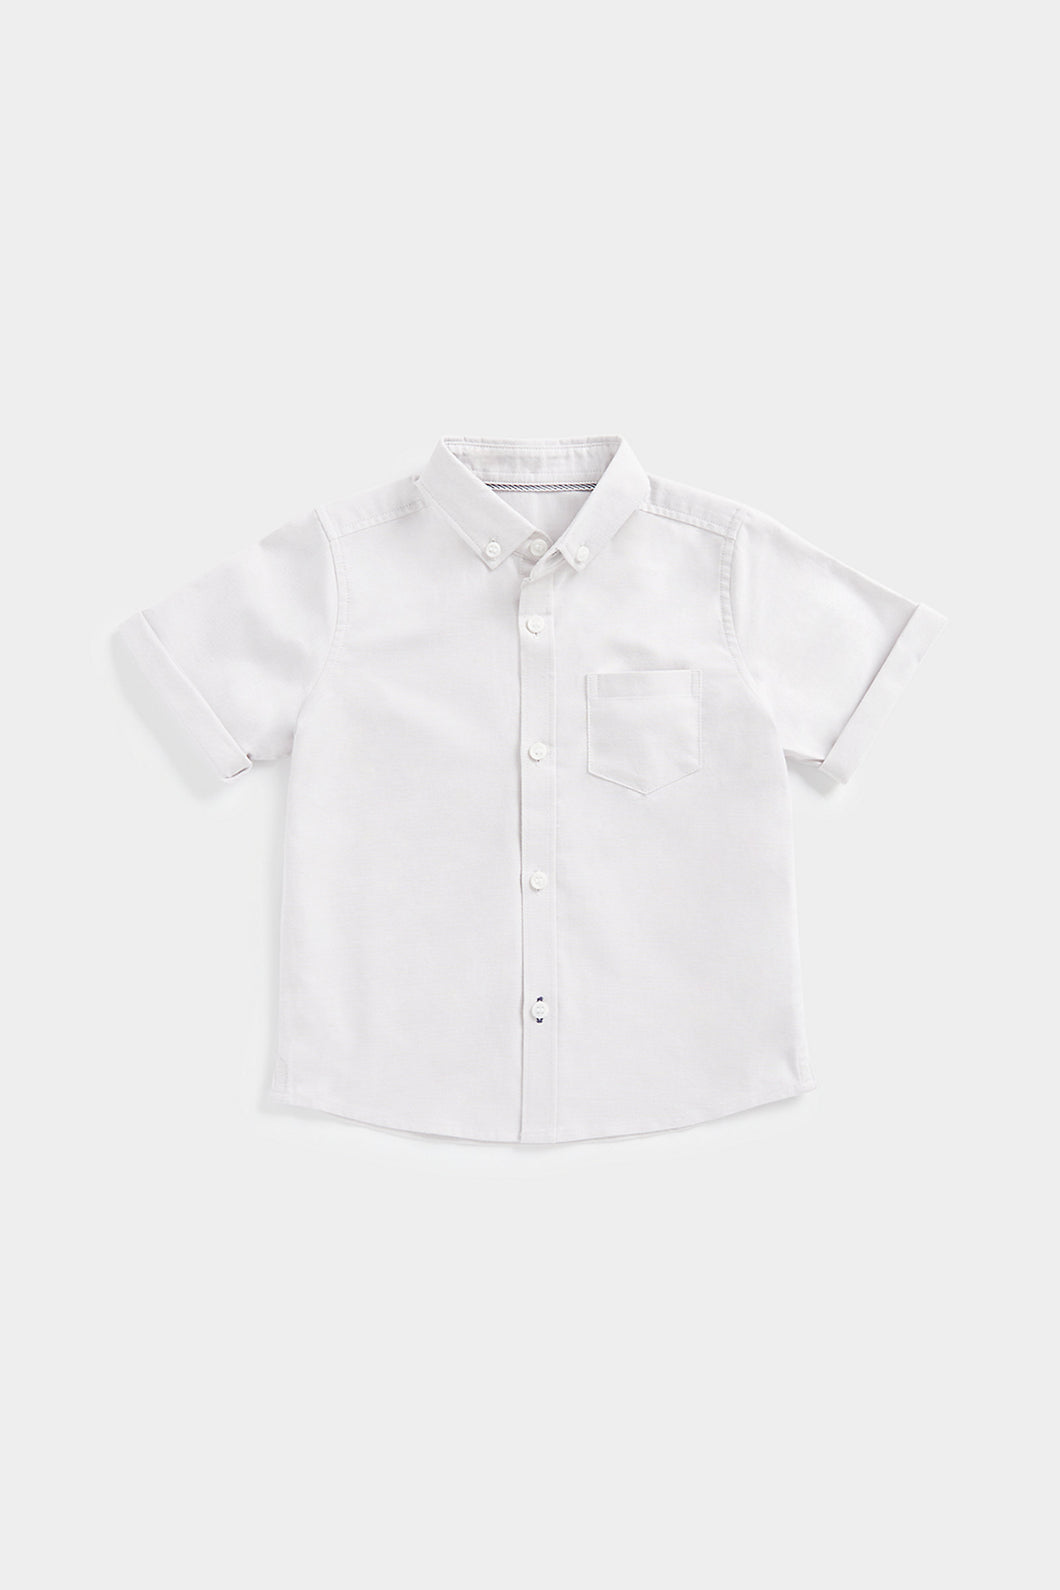 Mothercare Stone Oxford Shirt